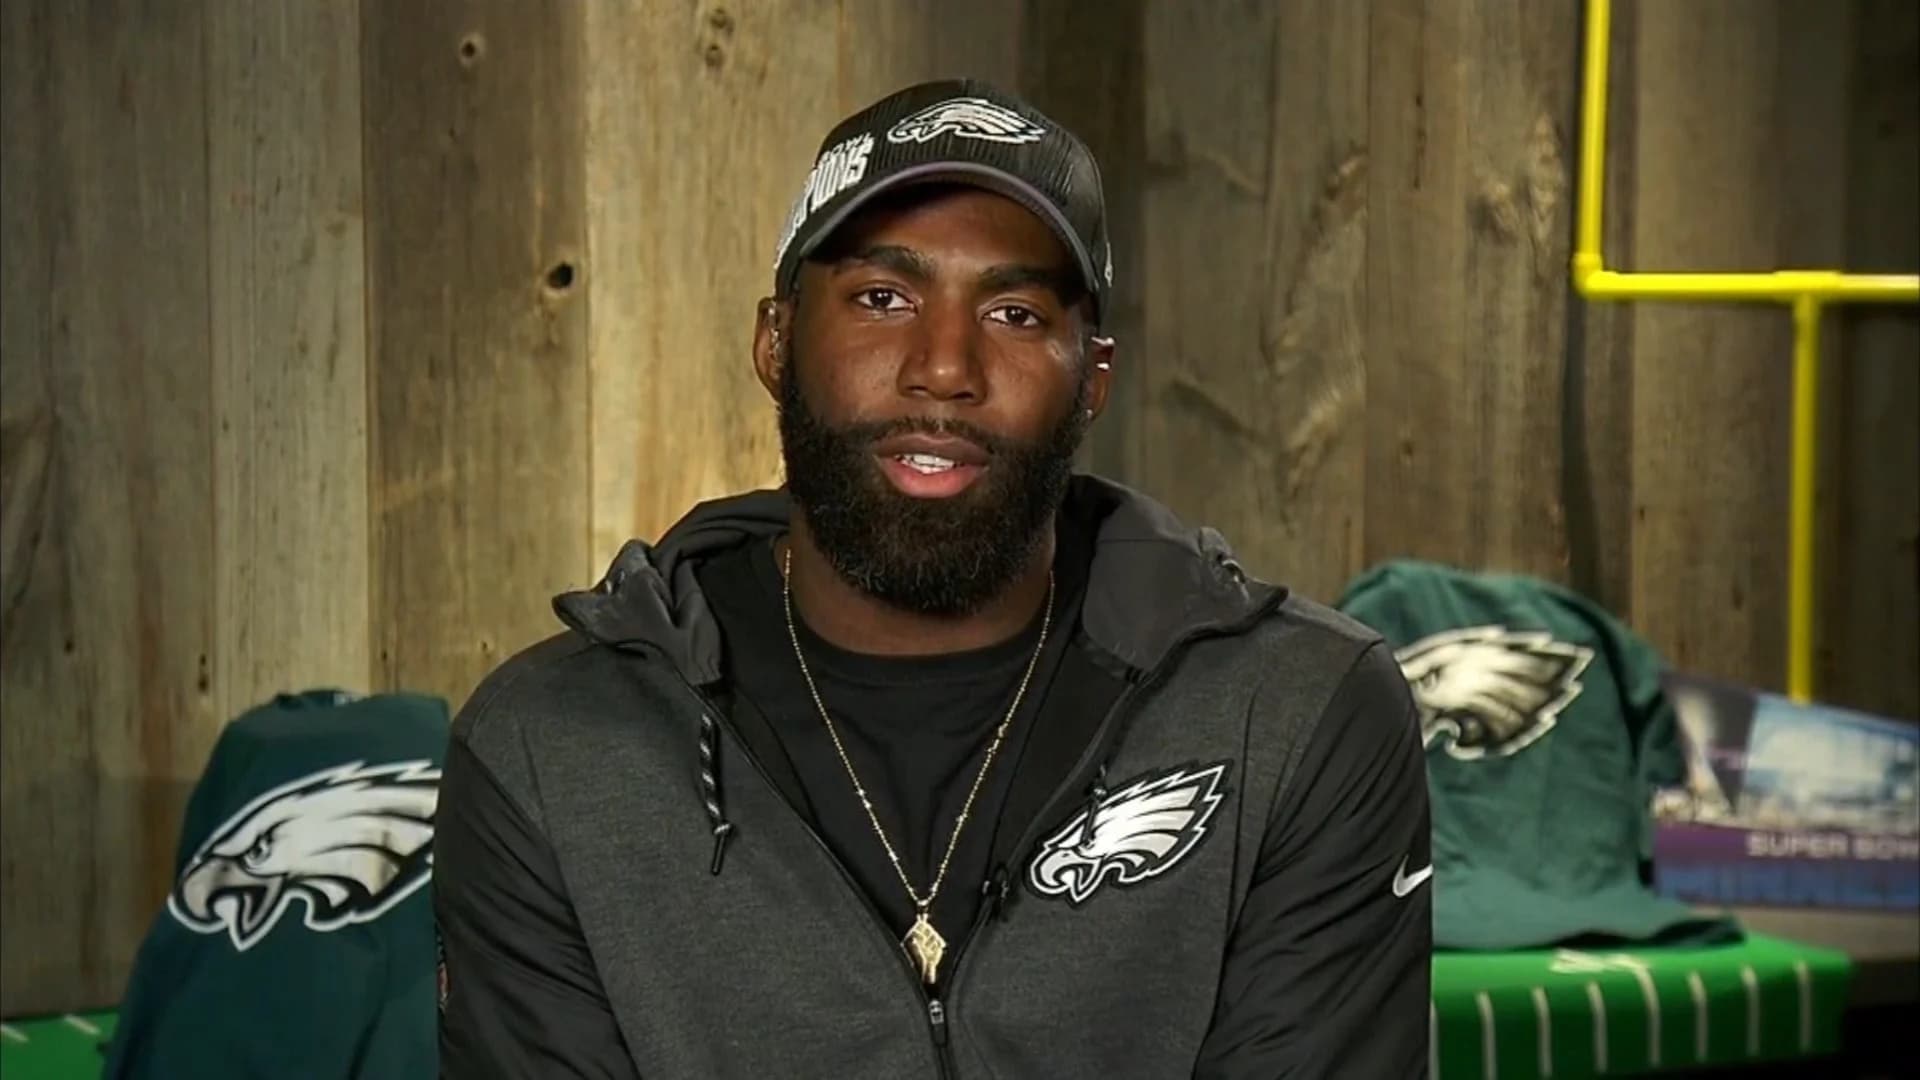 Eagles’ player says he won’t go to White House after Super Bowl win